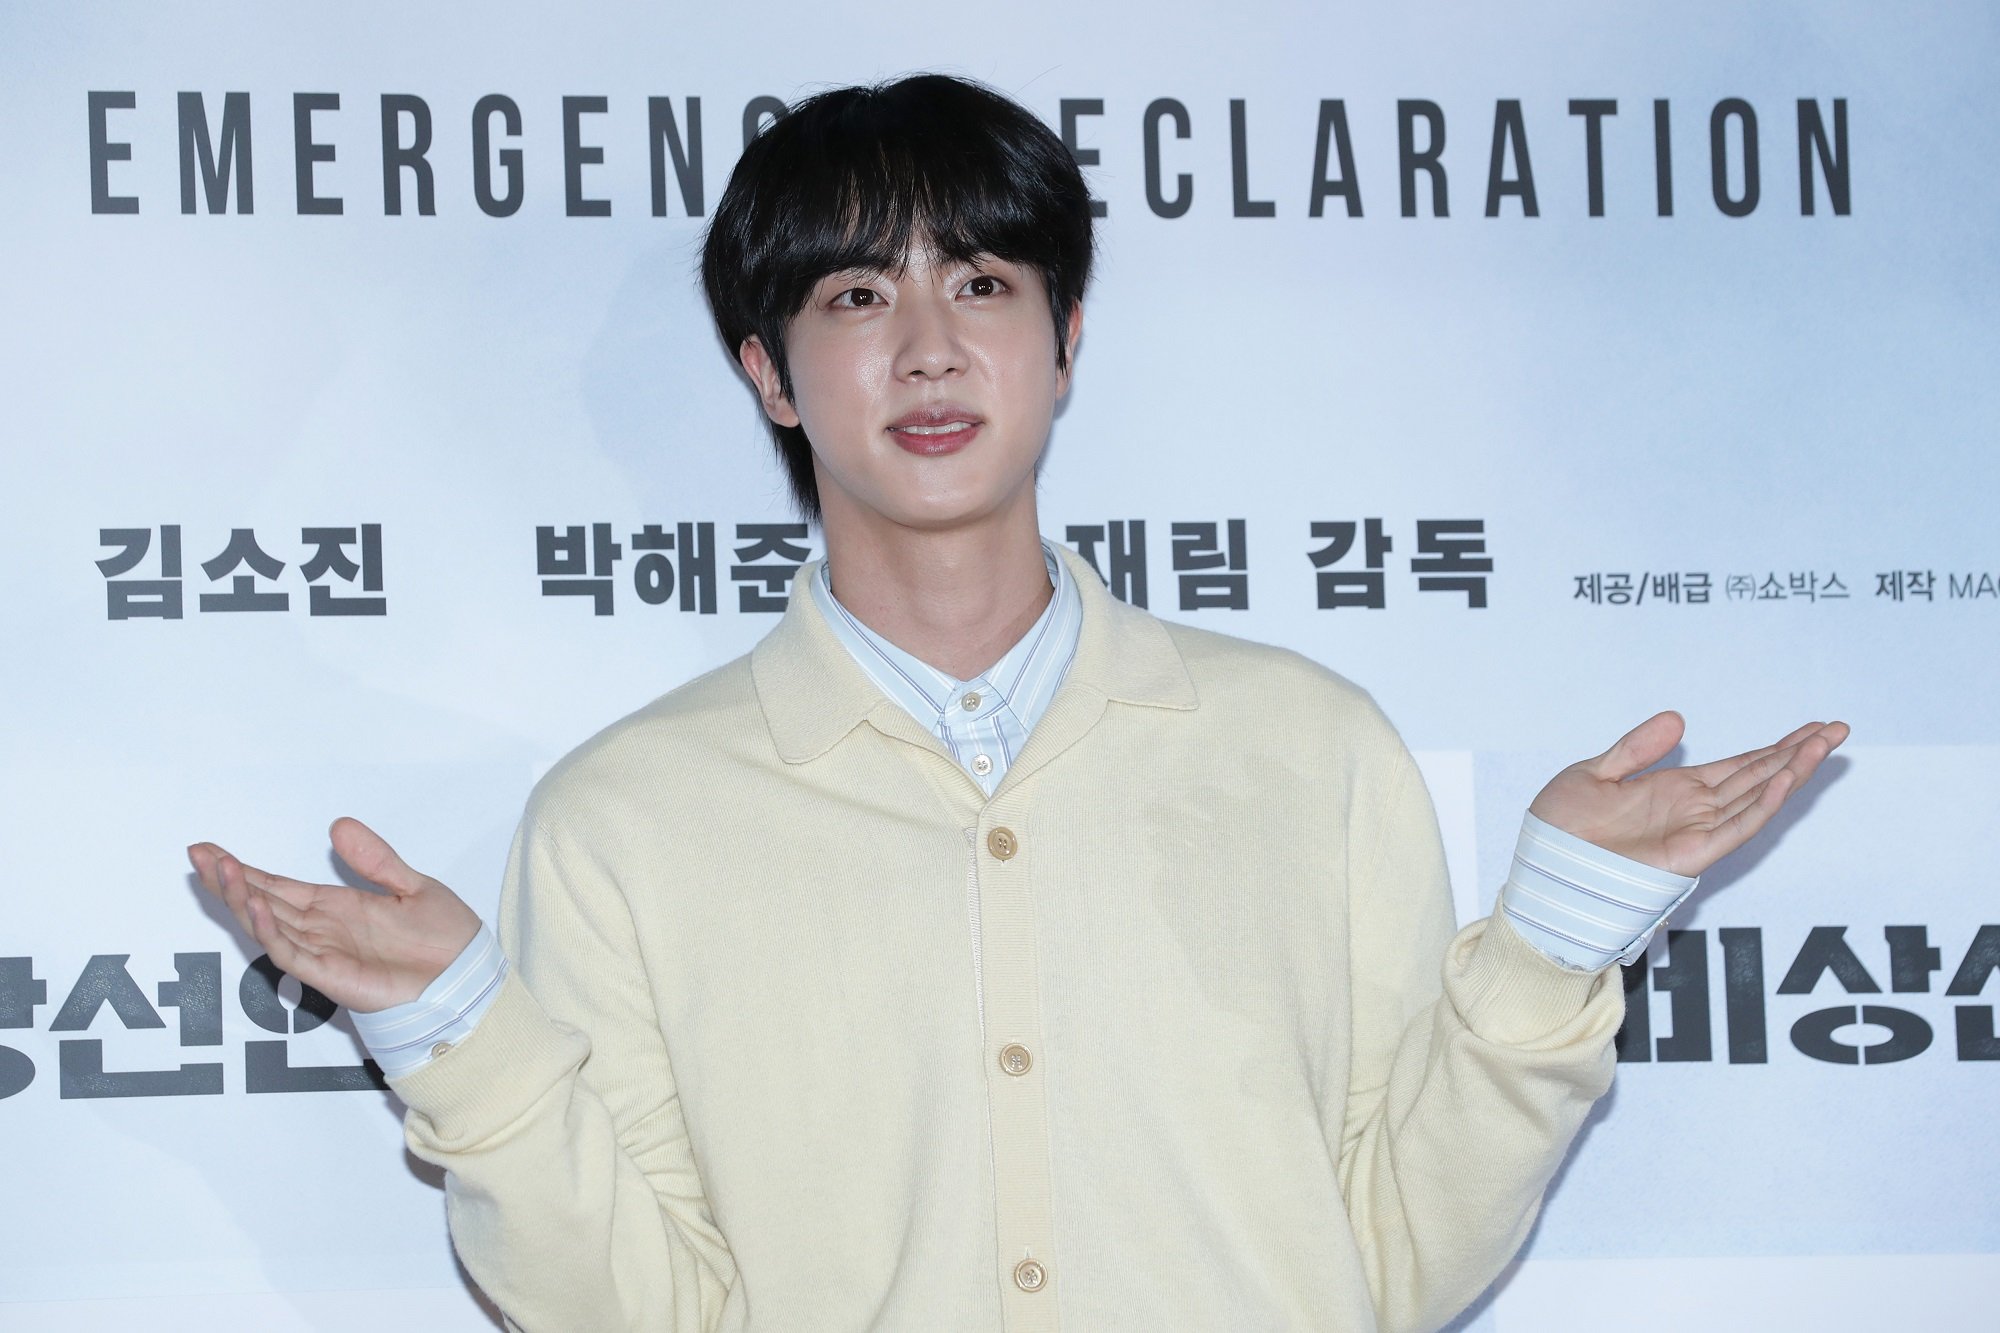 Jin of BTS shrugs while wearing a light yellow sweater